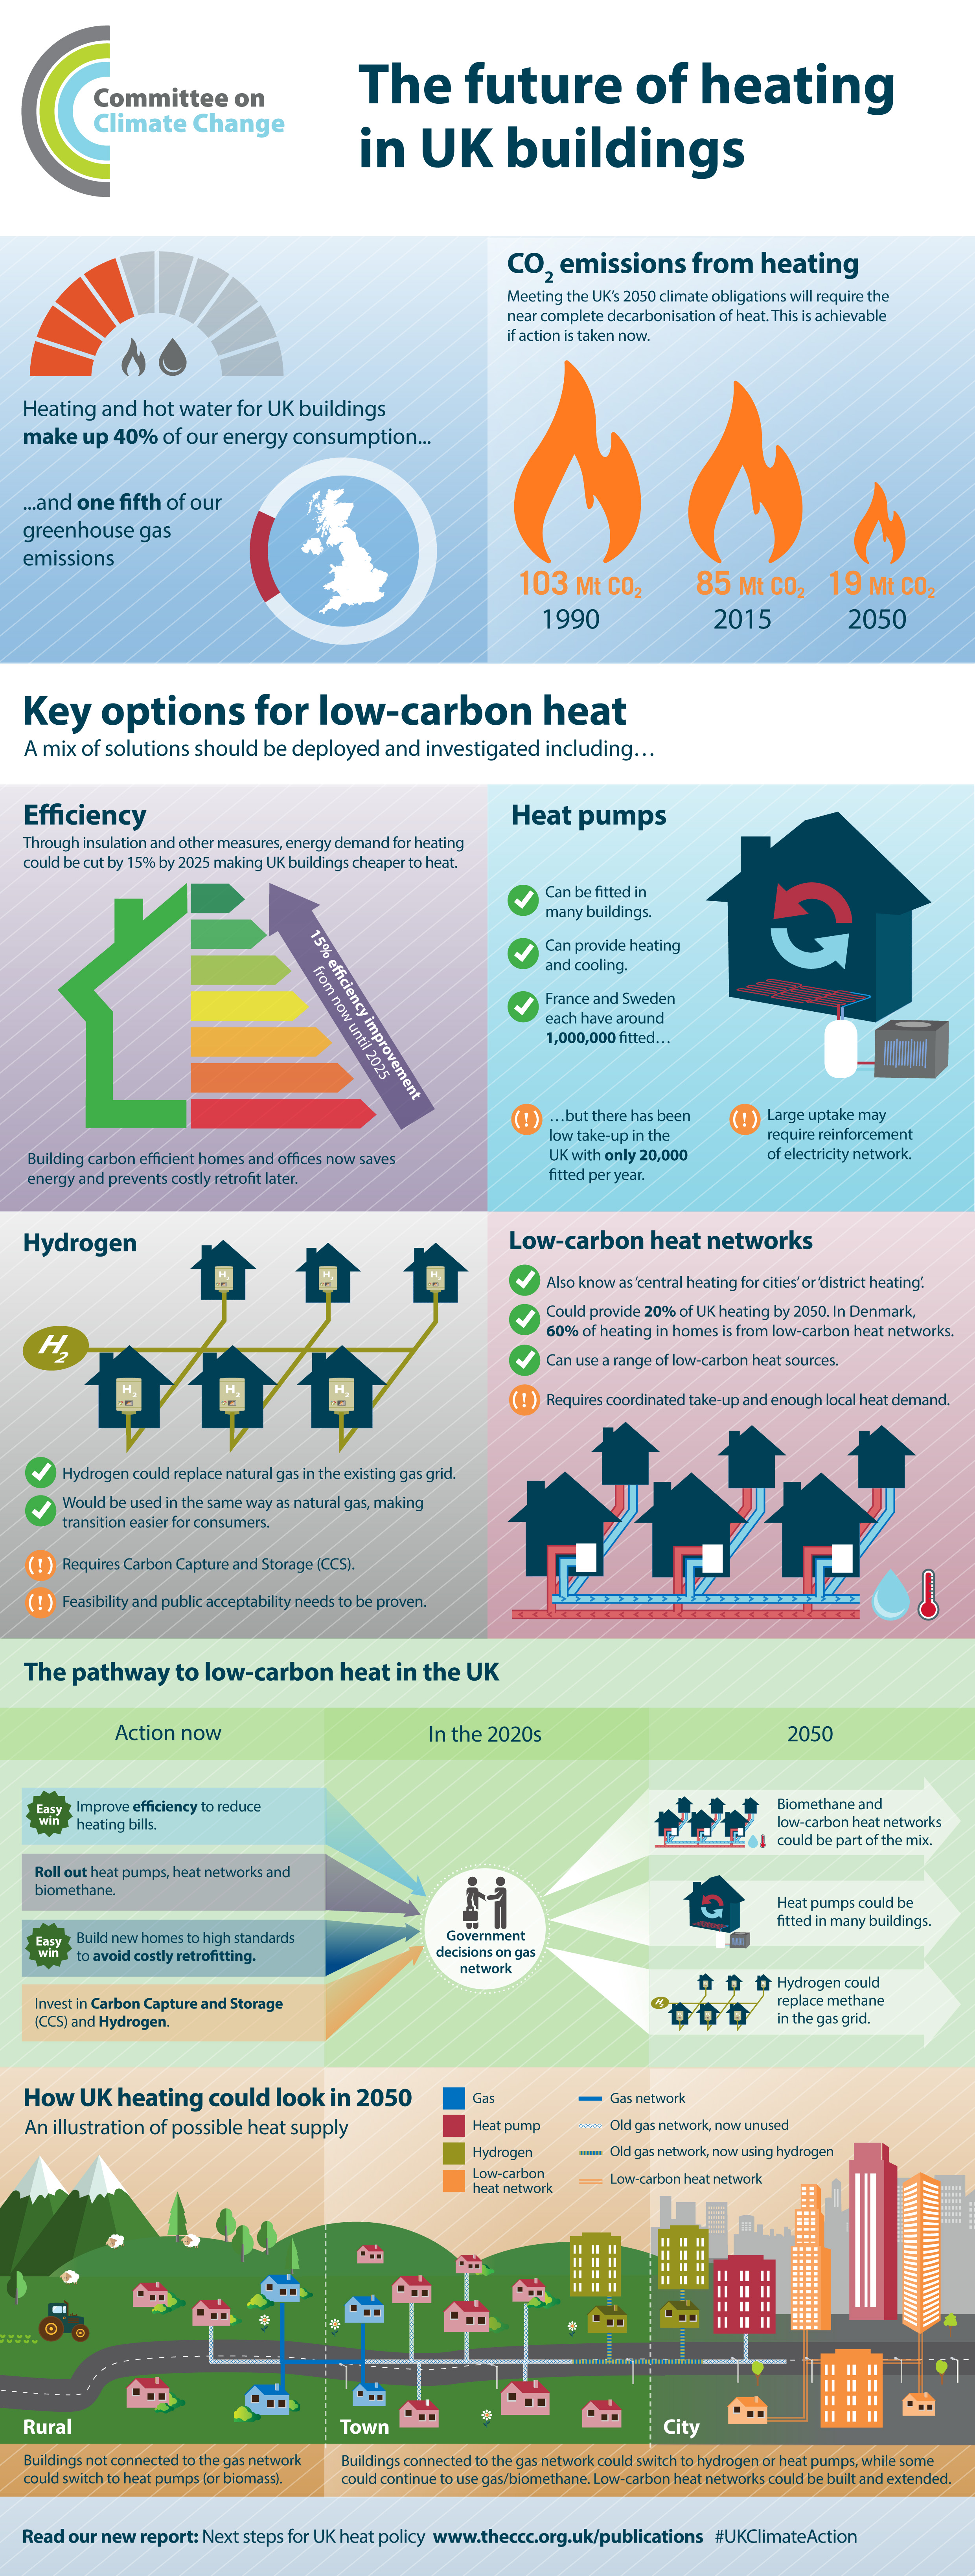 Infographic - The future of heating in UK buildings